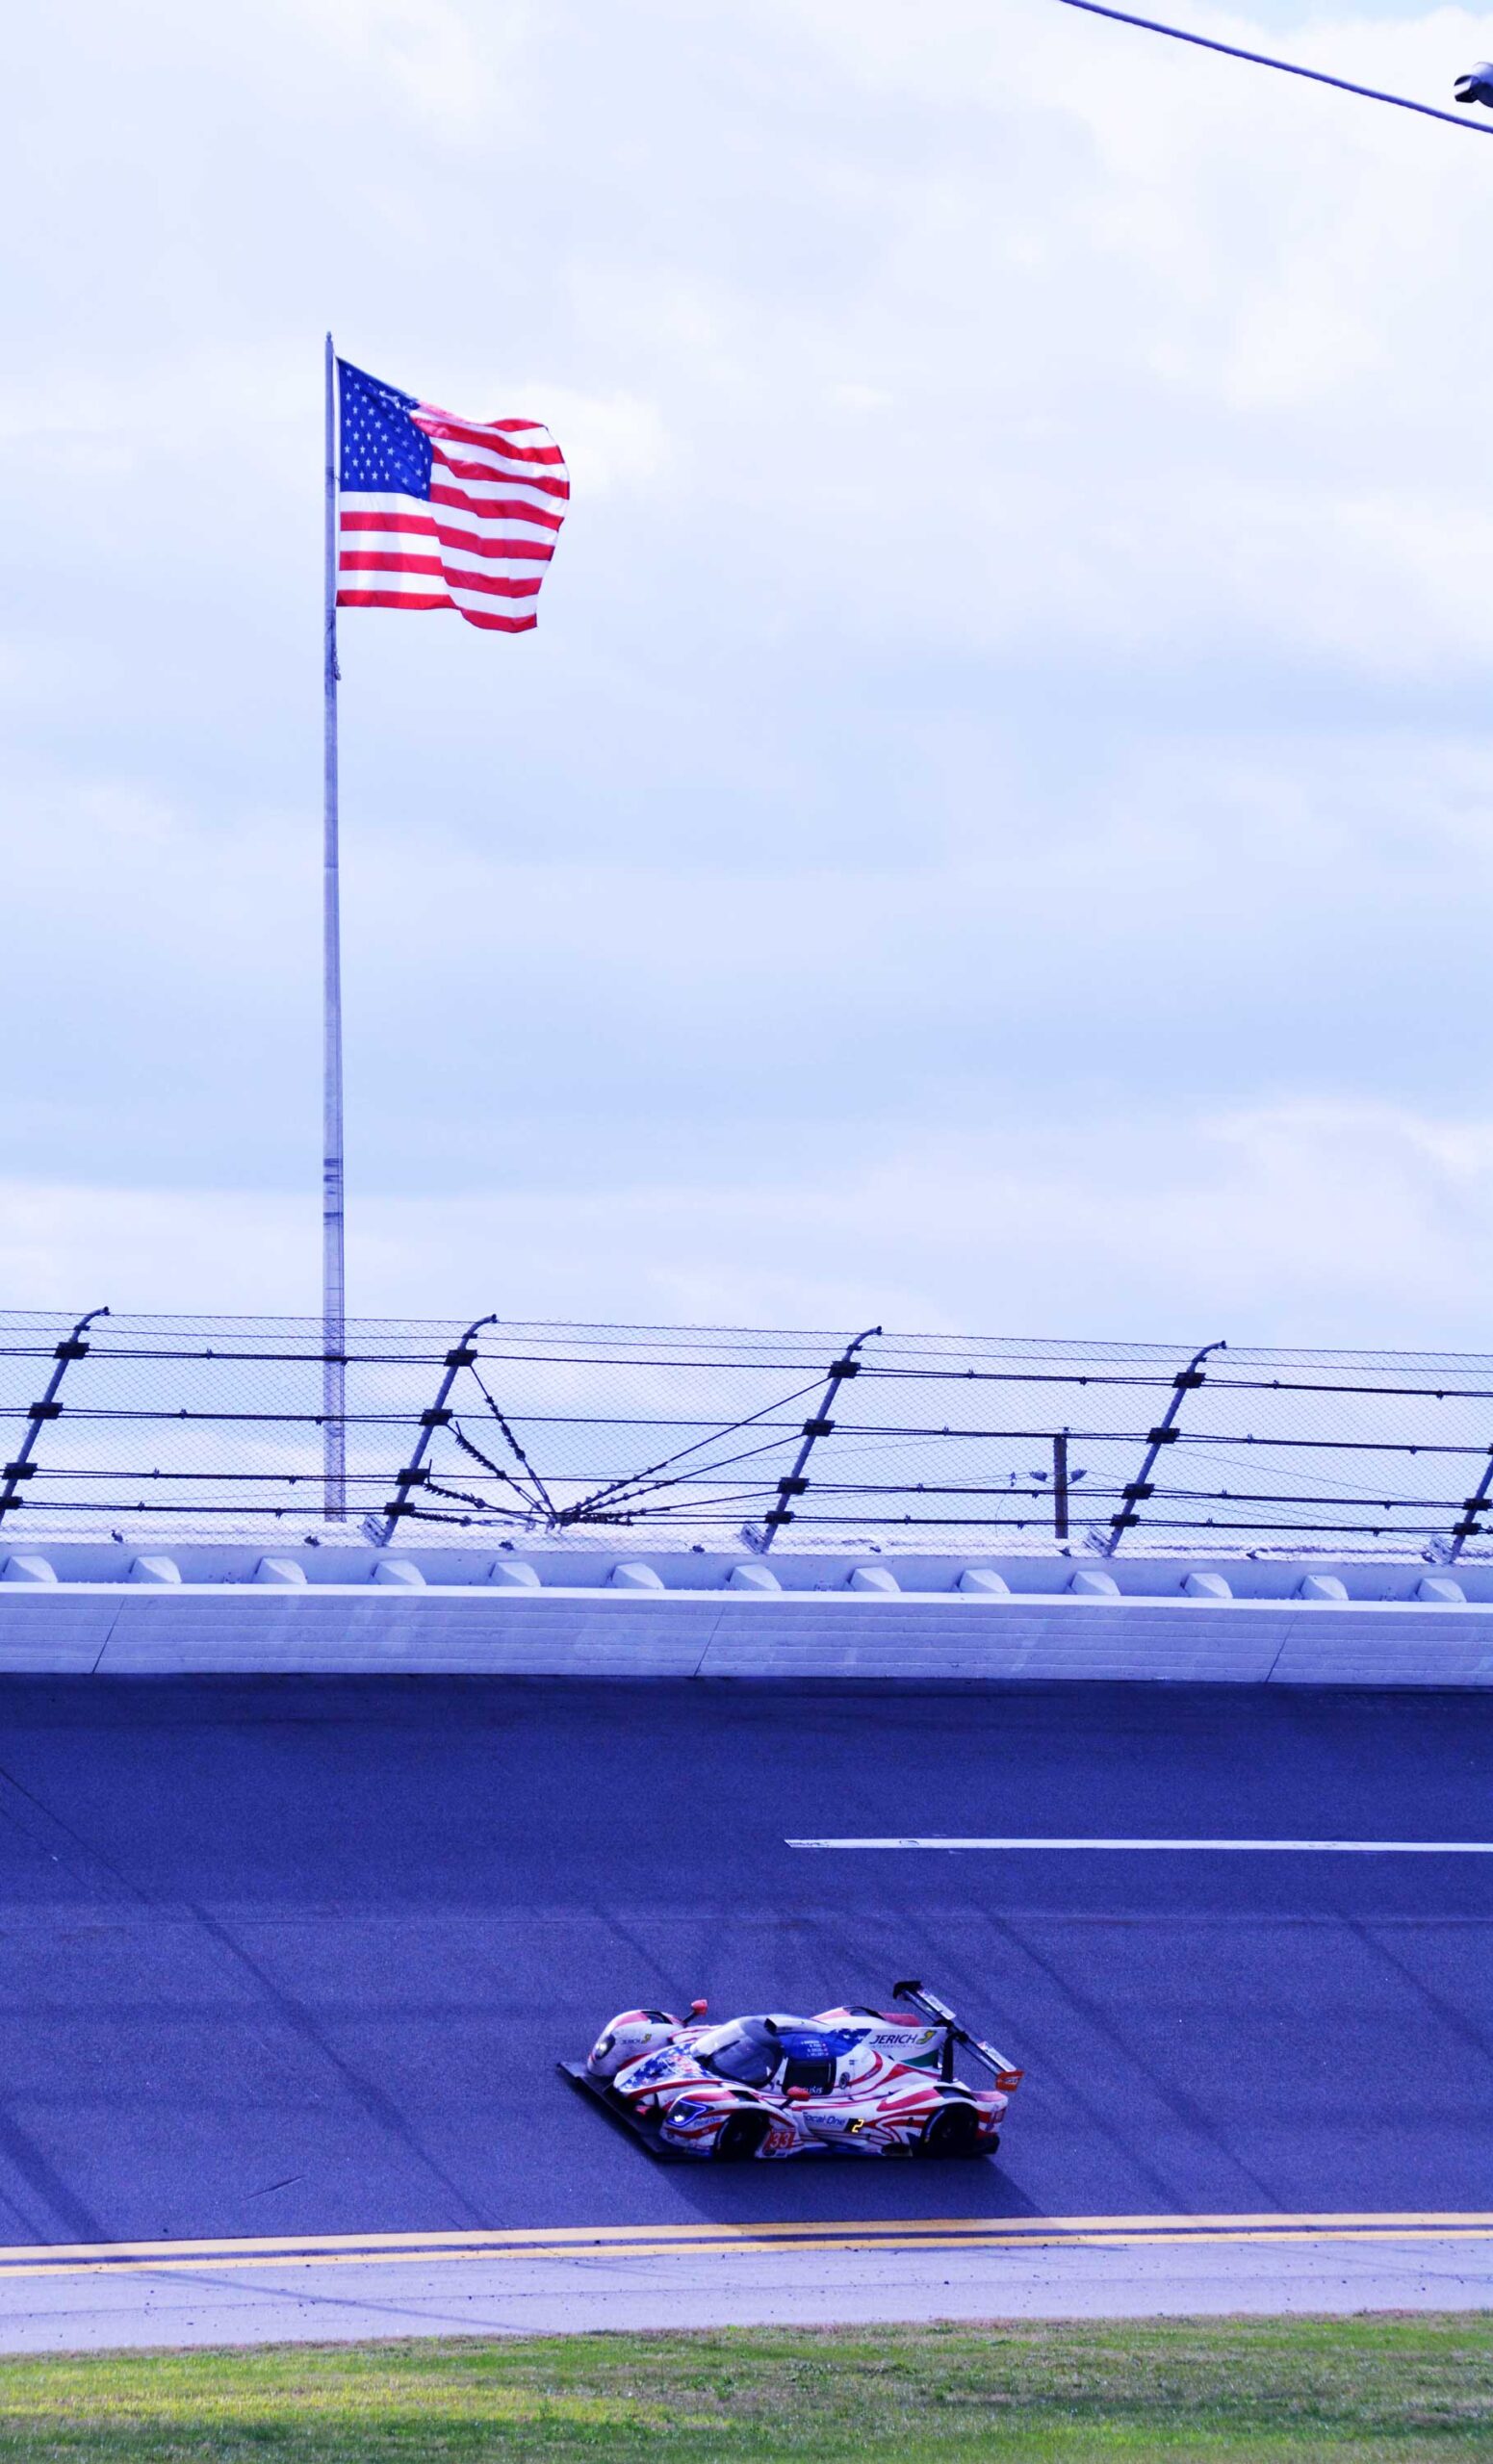 American flag and car on track